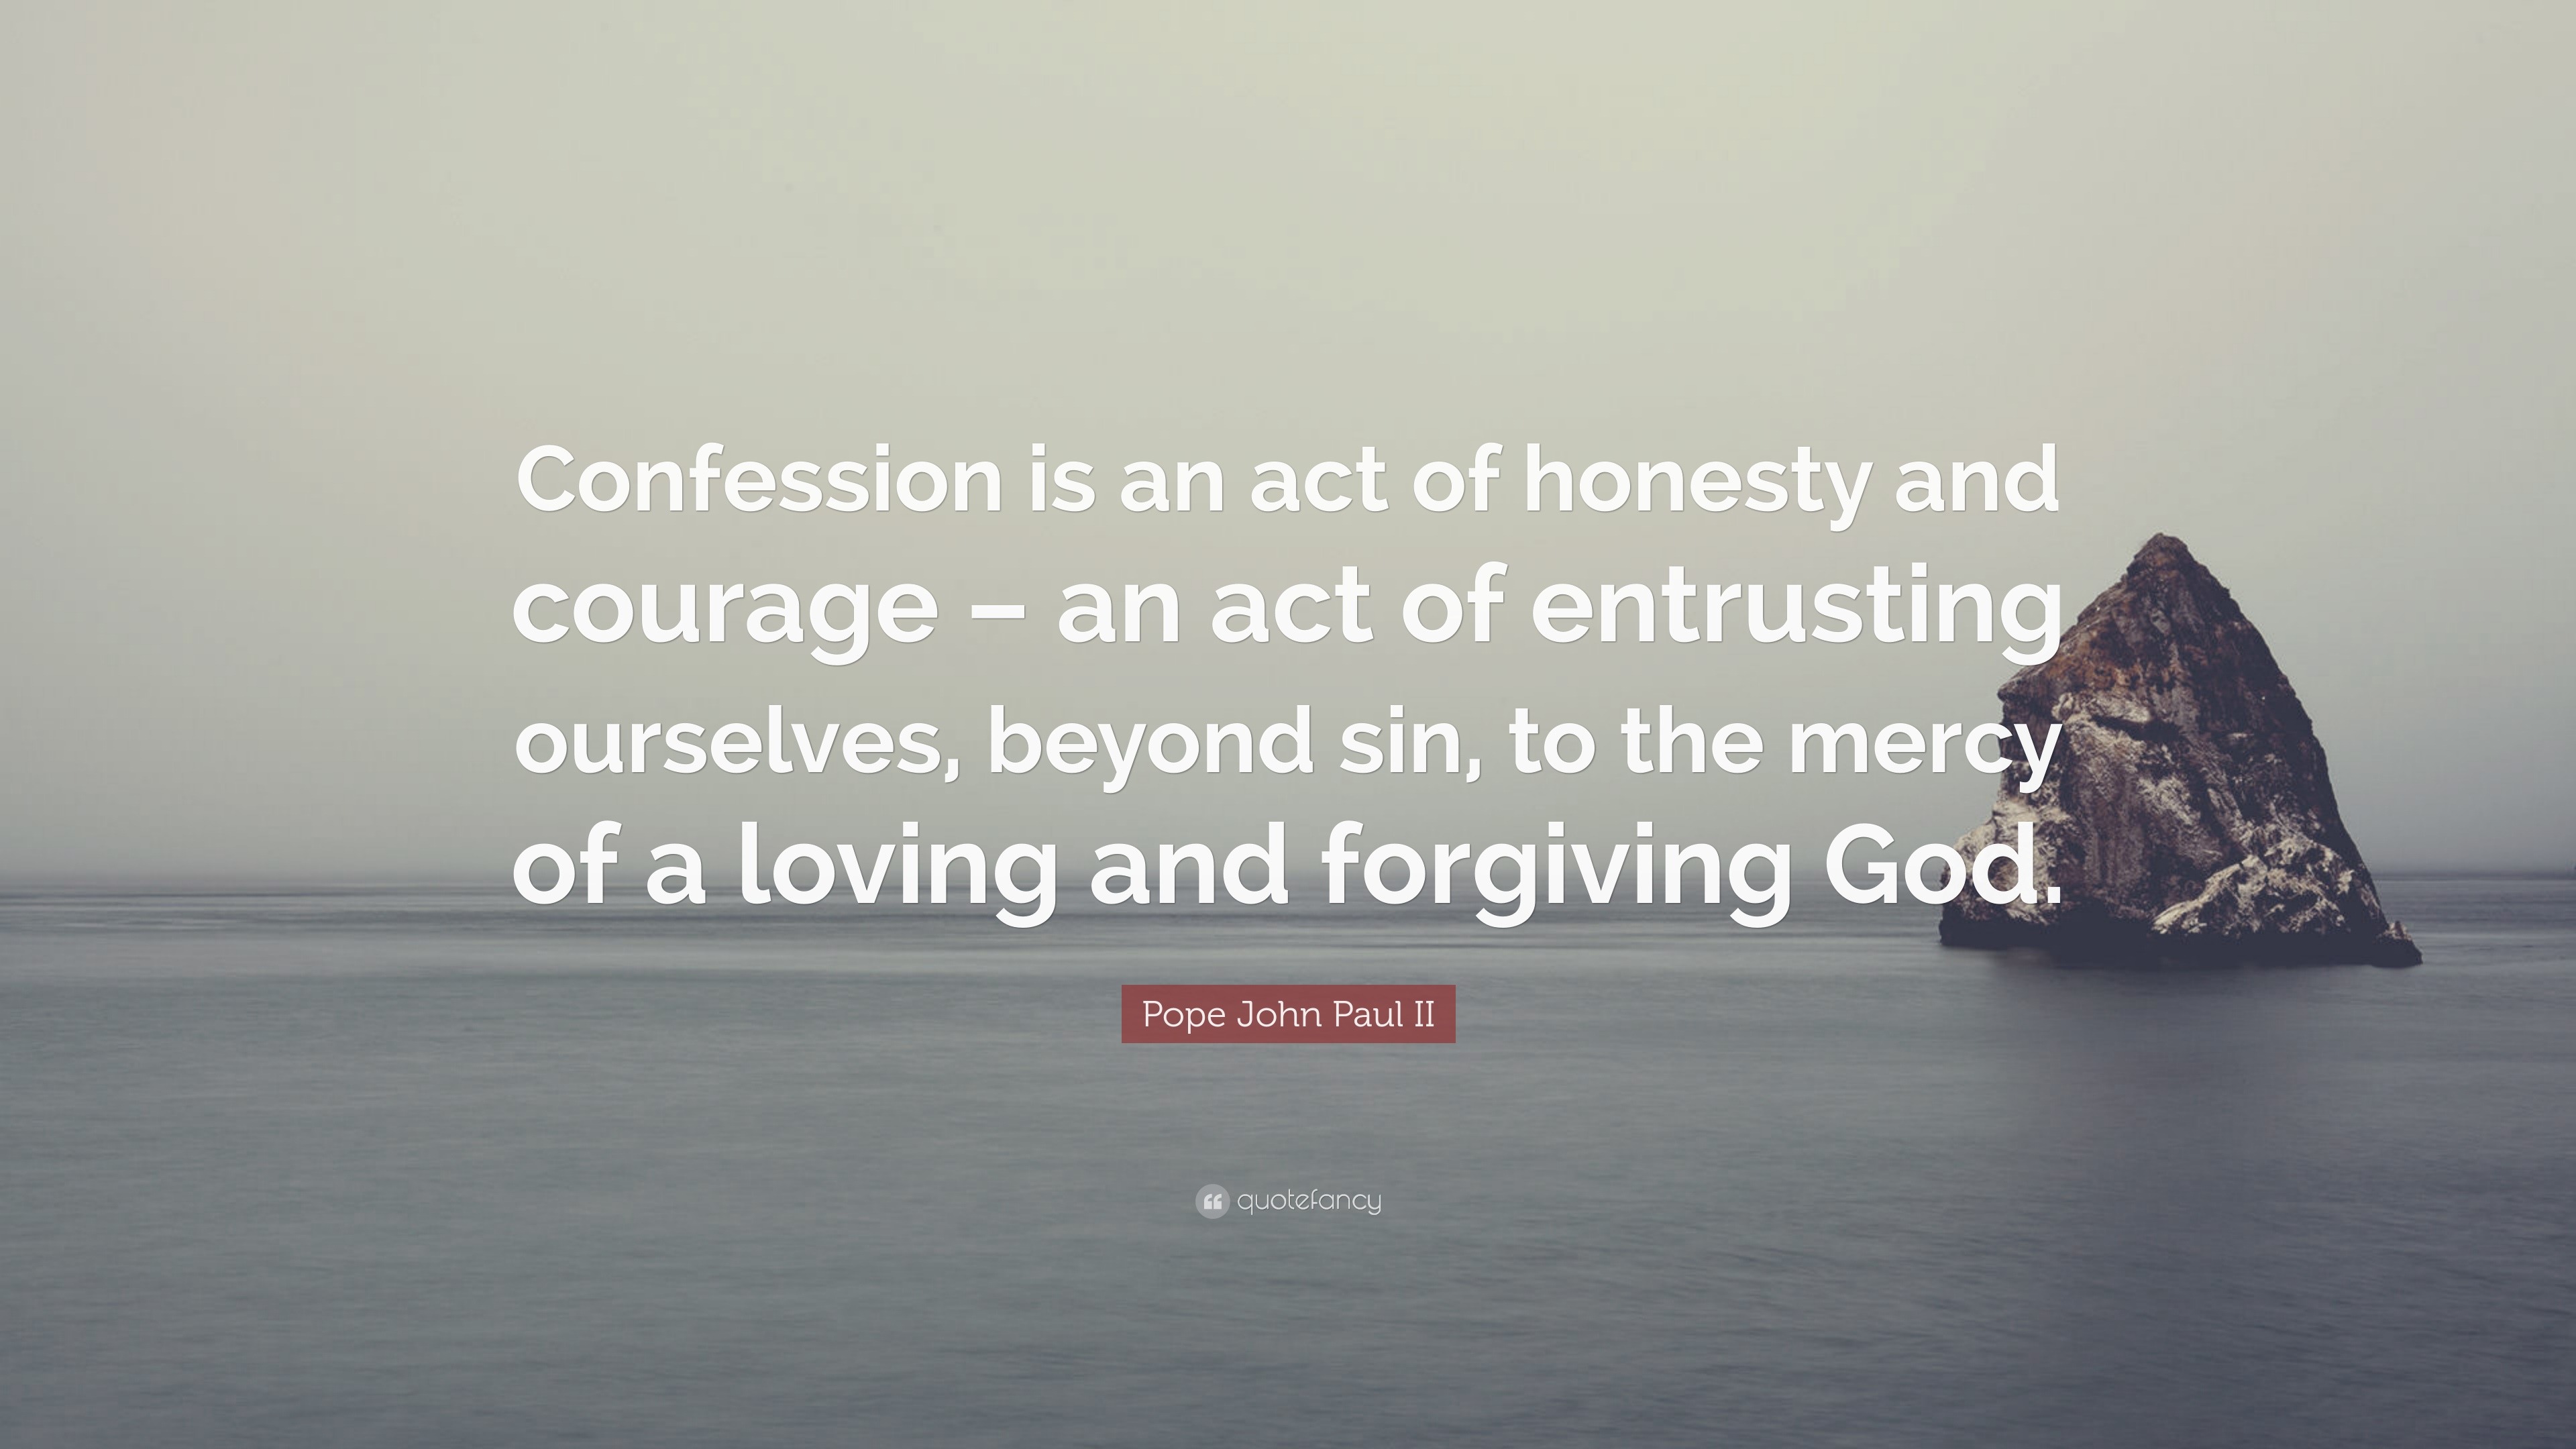 Pope John Paul II Quote: “Confession is an act of honesty and courage – an  act of entrusting ourselves